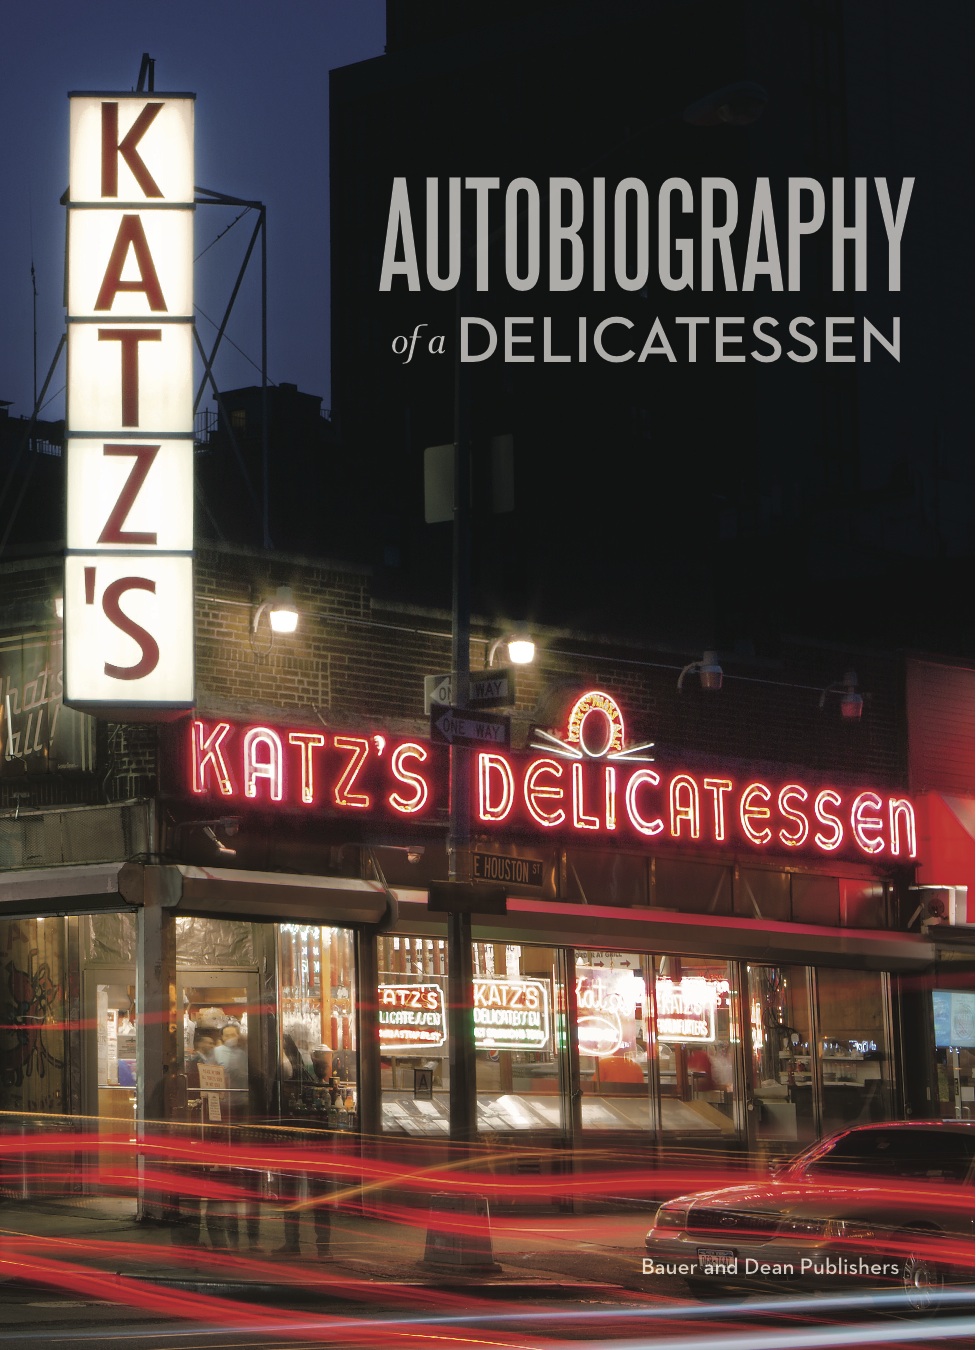 Book Party and Discussion: Katz's: Autobiography of a Delicatessen by Jake Dell and Baldomero Fernandez, with Lucky Peach's Adam Krefman